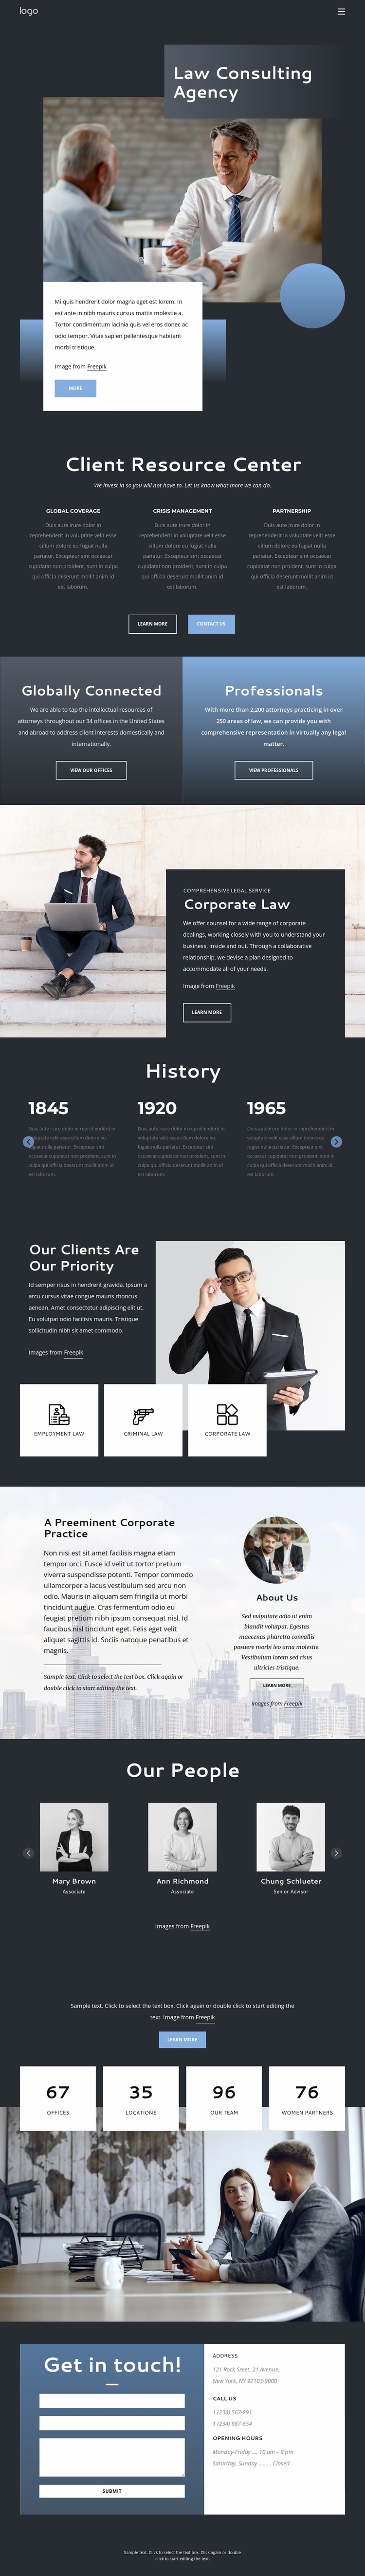 Law consulting agency Website Template